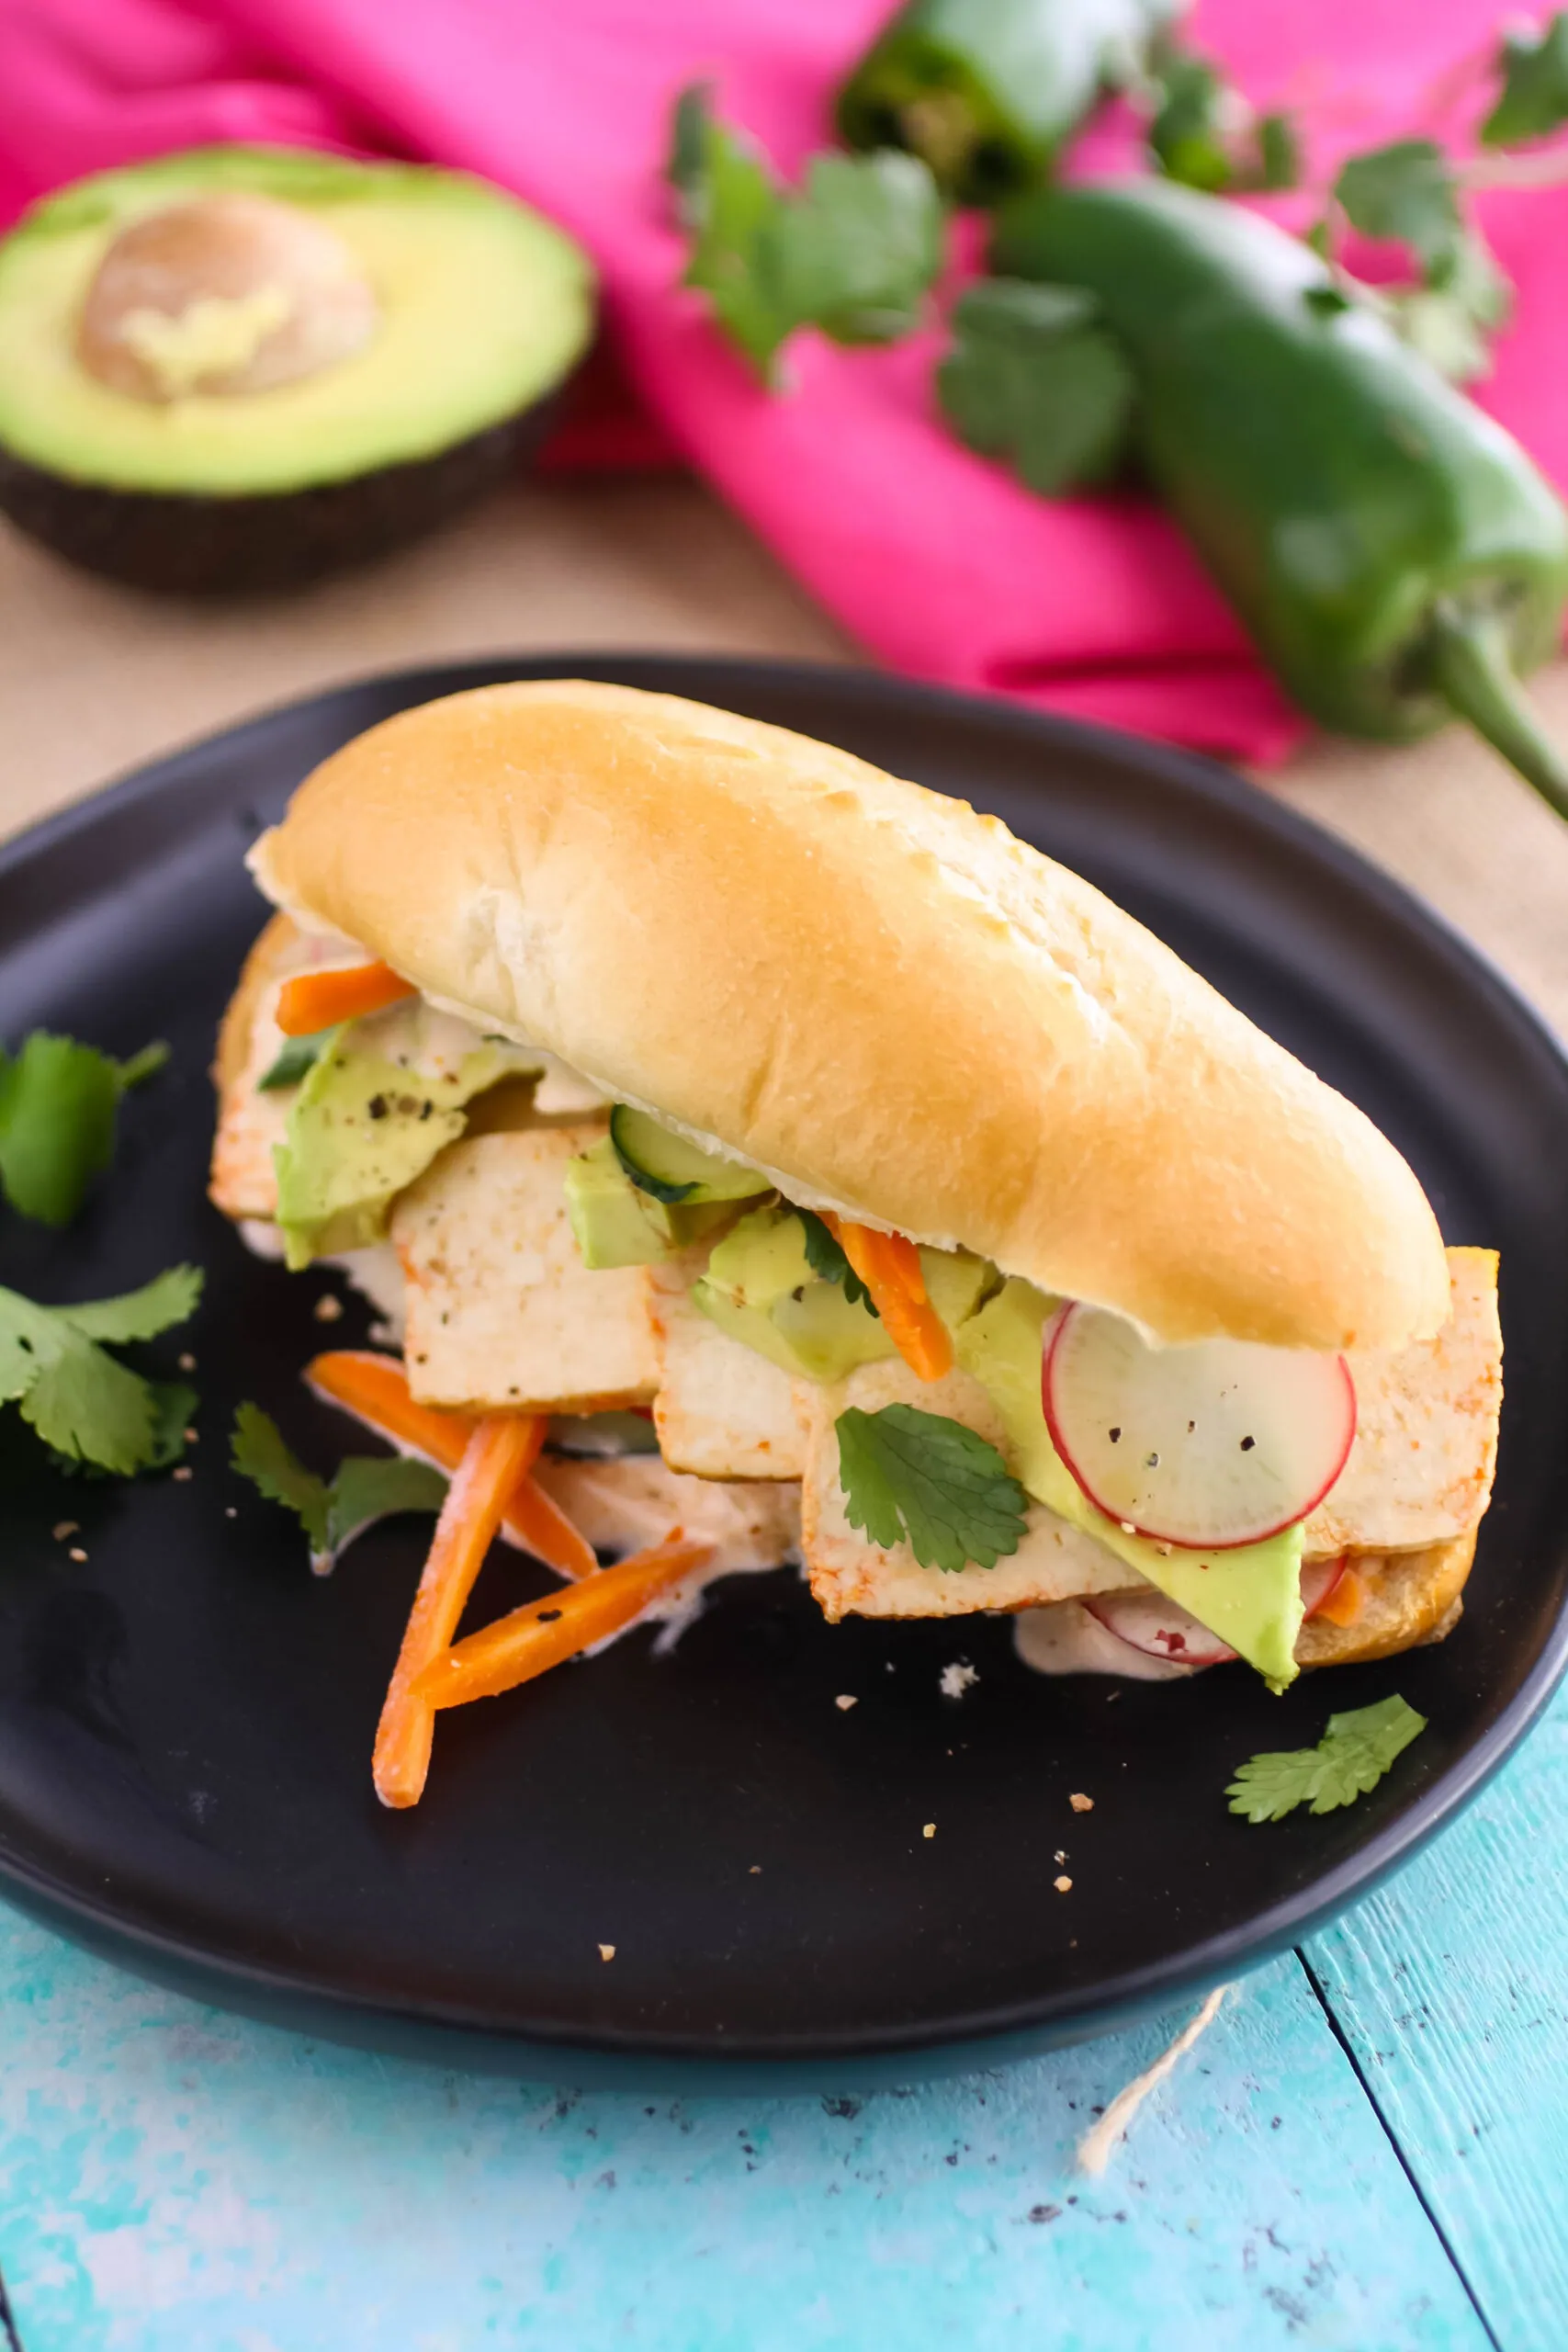 This spicy tofu banh mi sandwich is hearty and colorful.